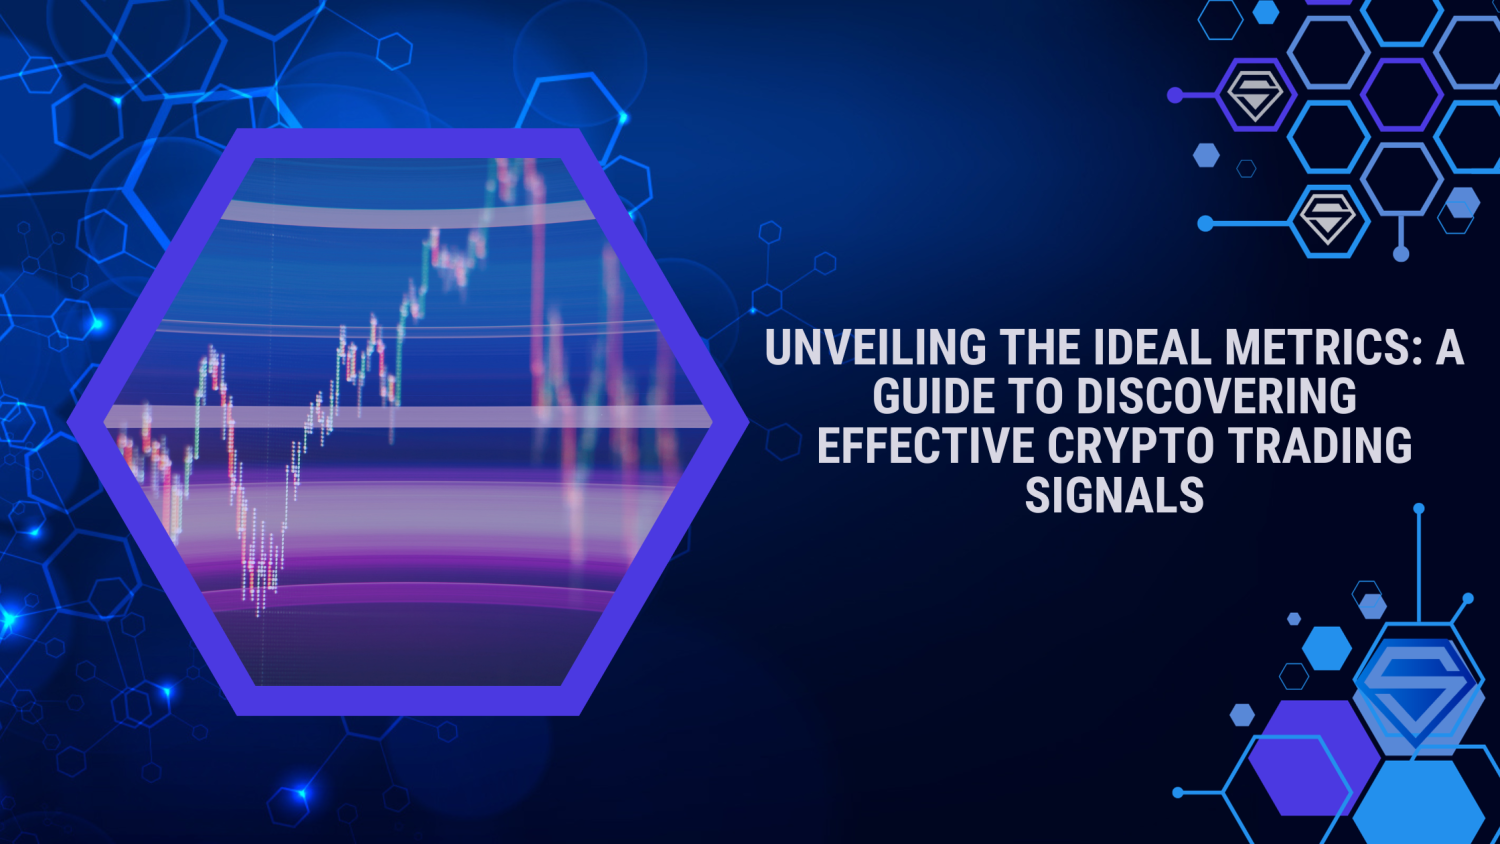 How to Find the Best Indicator for Crypto Trading